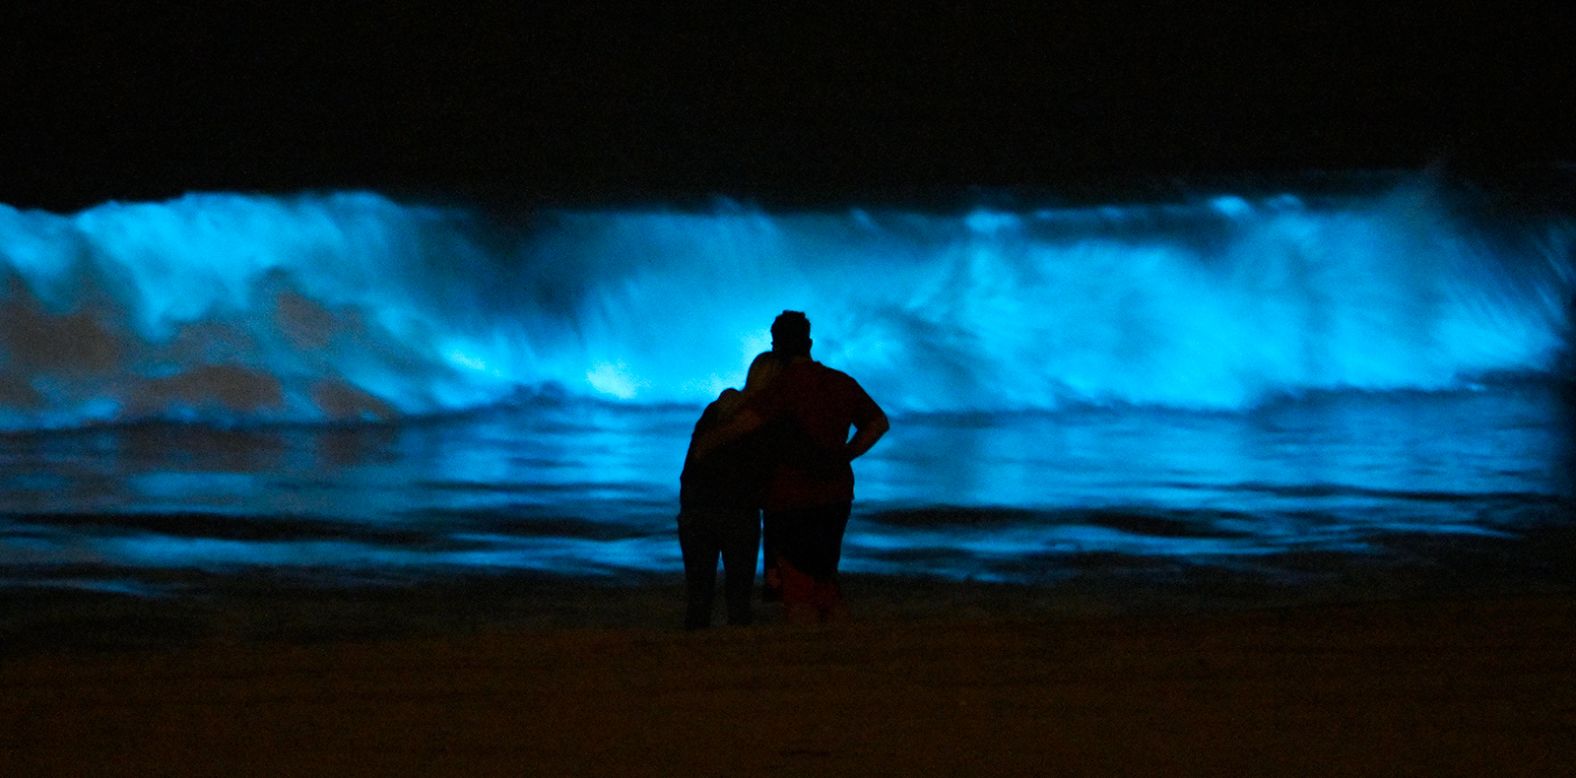 People in Los Angeles watch bioluminescent plankton light up the shoreline at Dockweiler Beach on Wednesday, April 29. <a href="http://www.cnn.com/2020/04/23/world/gallery/week-in-photos-0424/index.html" target="_blank">See last week in 40 photos</a>